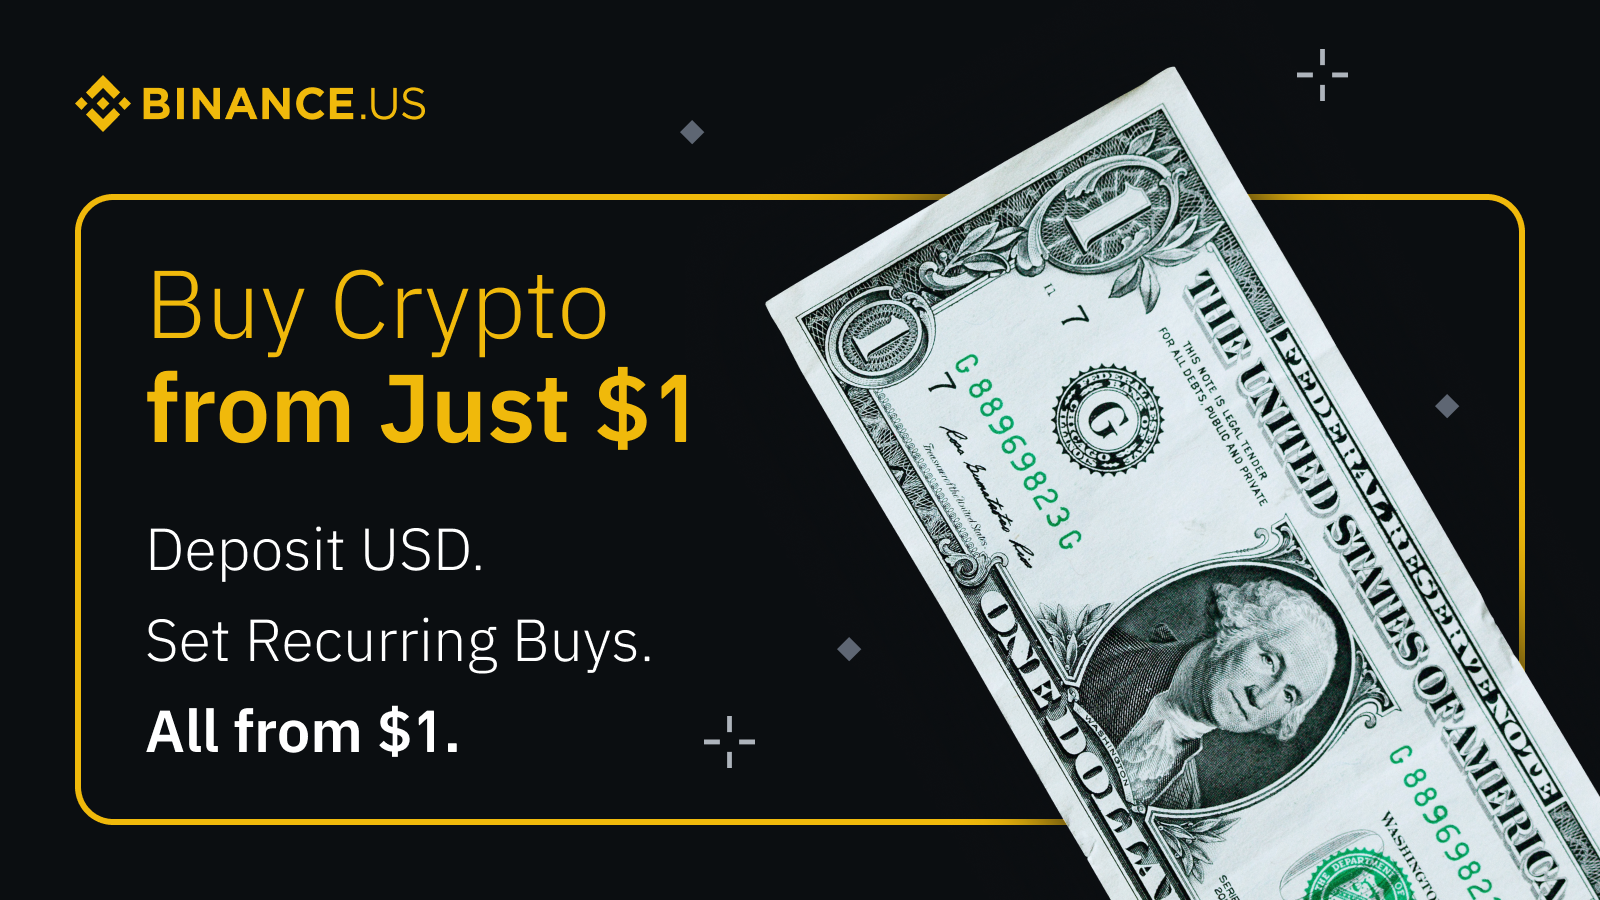 Buy Crypto & Bitcoin From as Little as $1